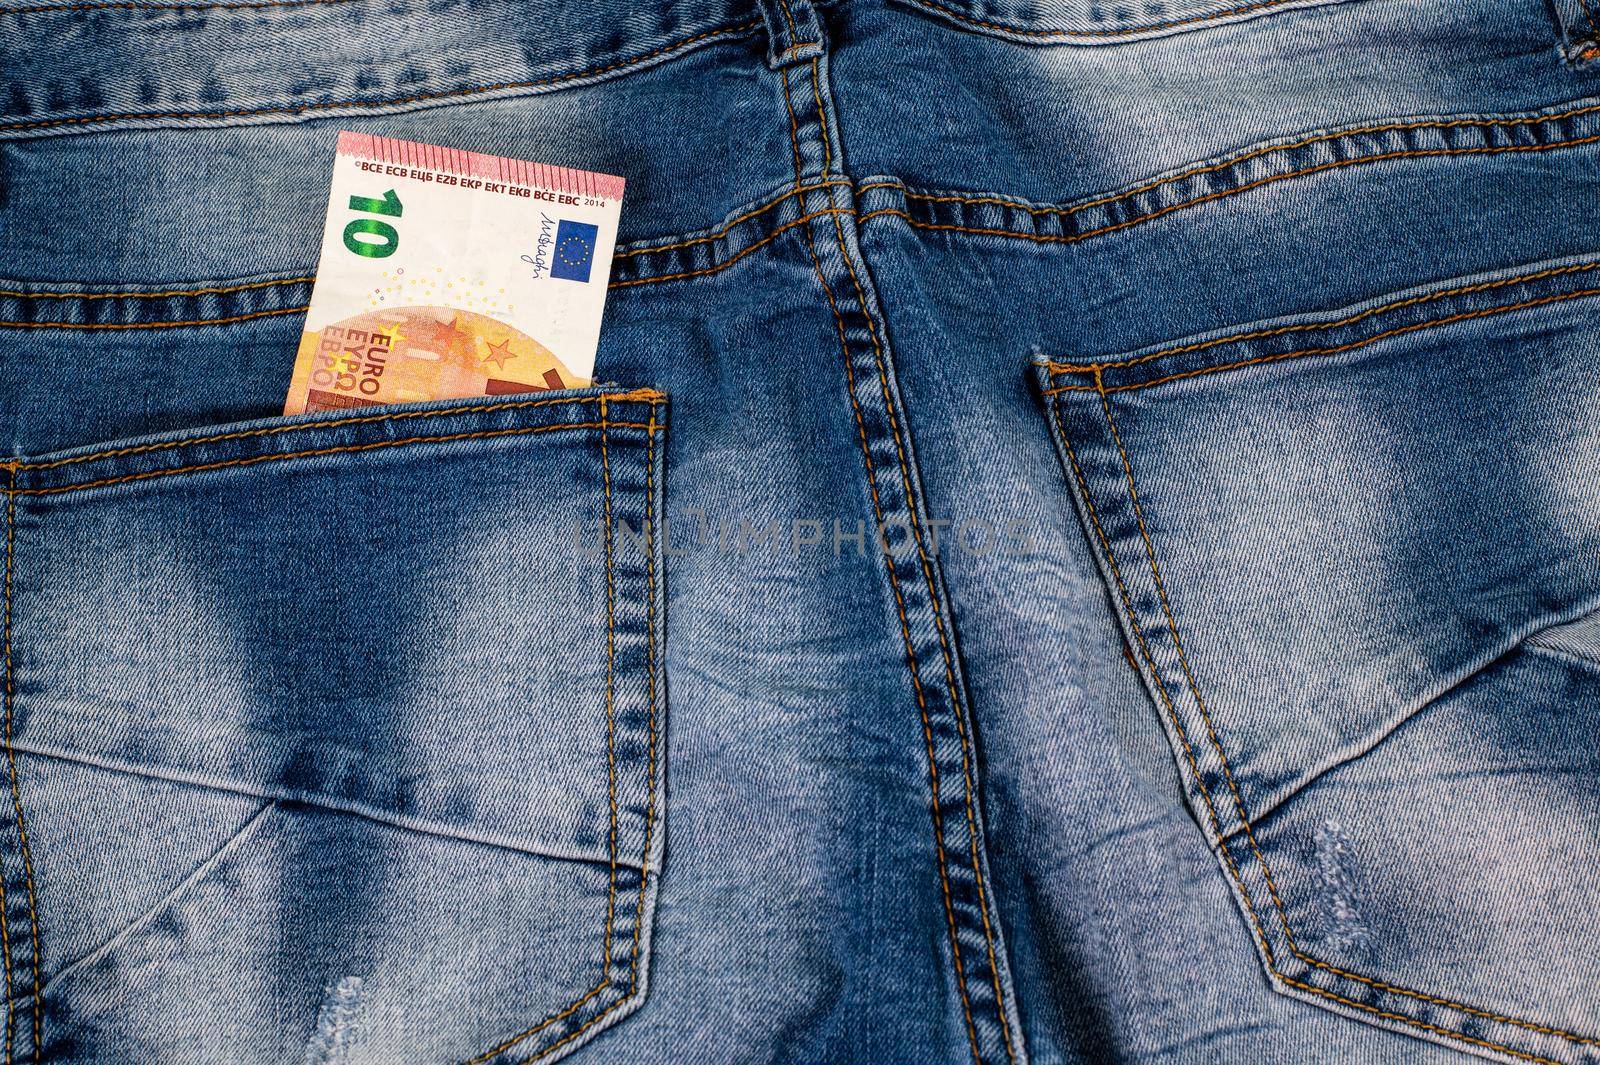 10 euros coming out of the jeans pocket by carfedeph